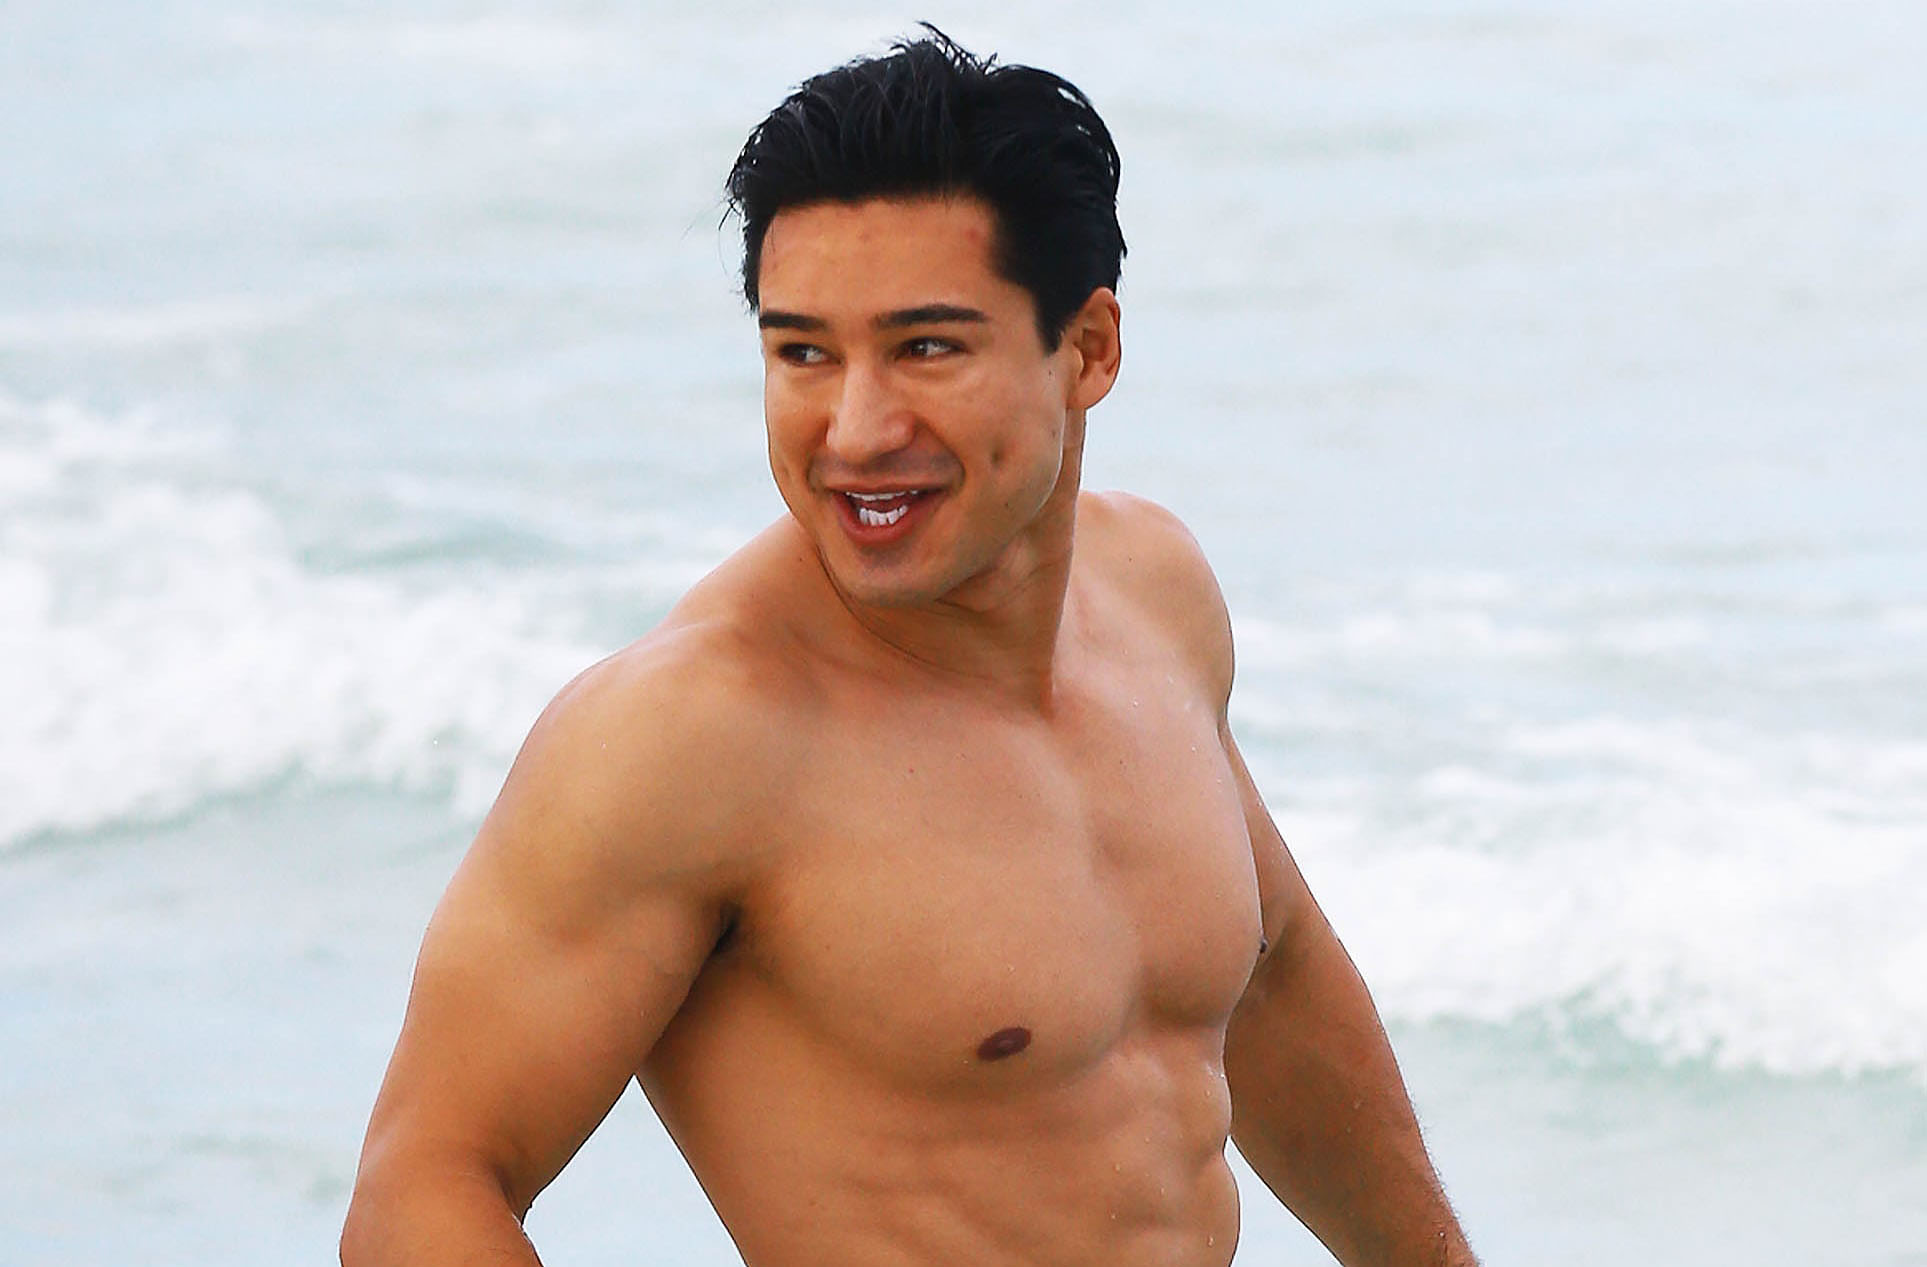 Mario Lopez showed off his sweaty chest on his birthday